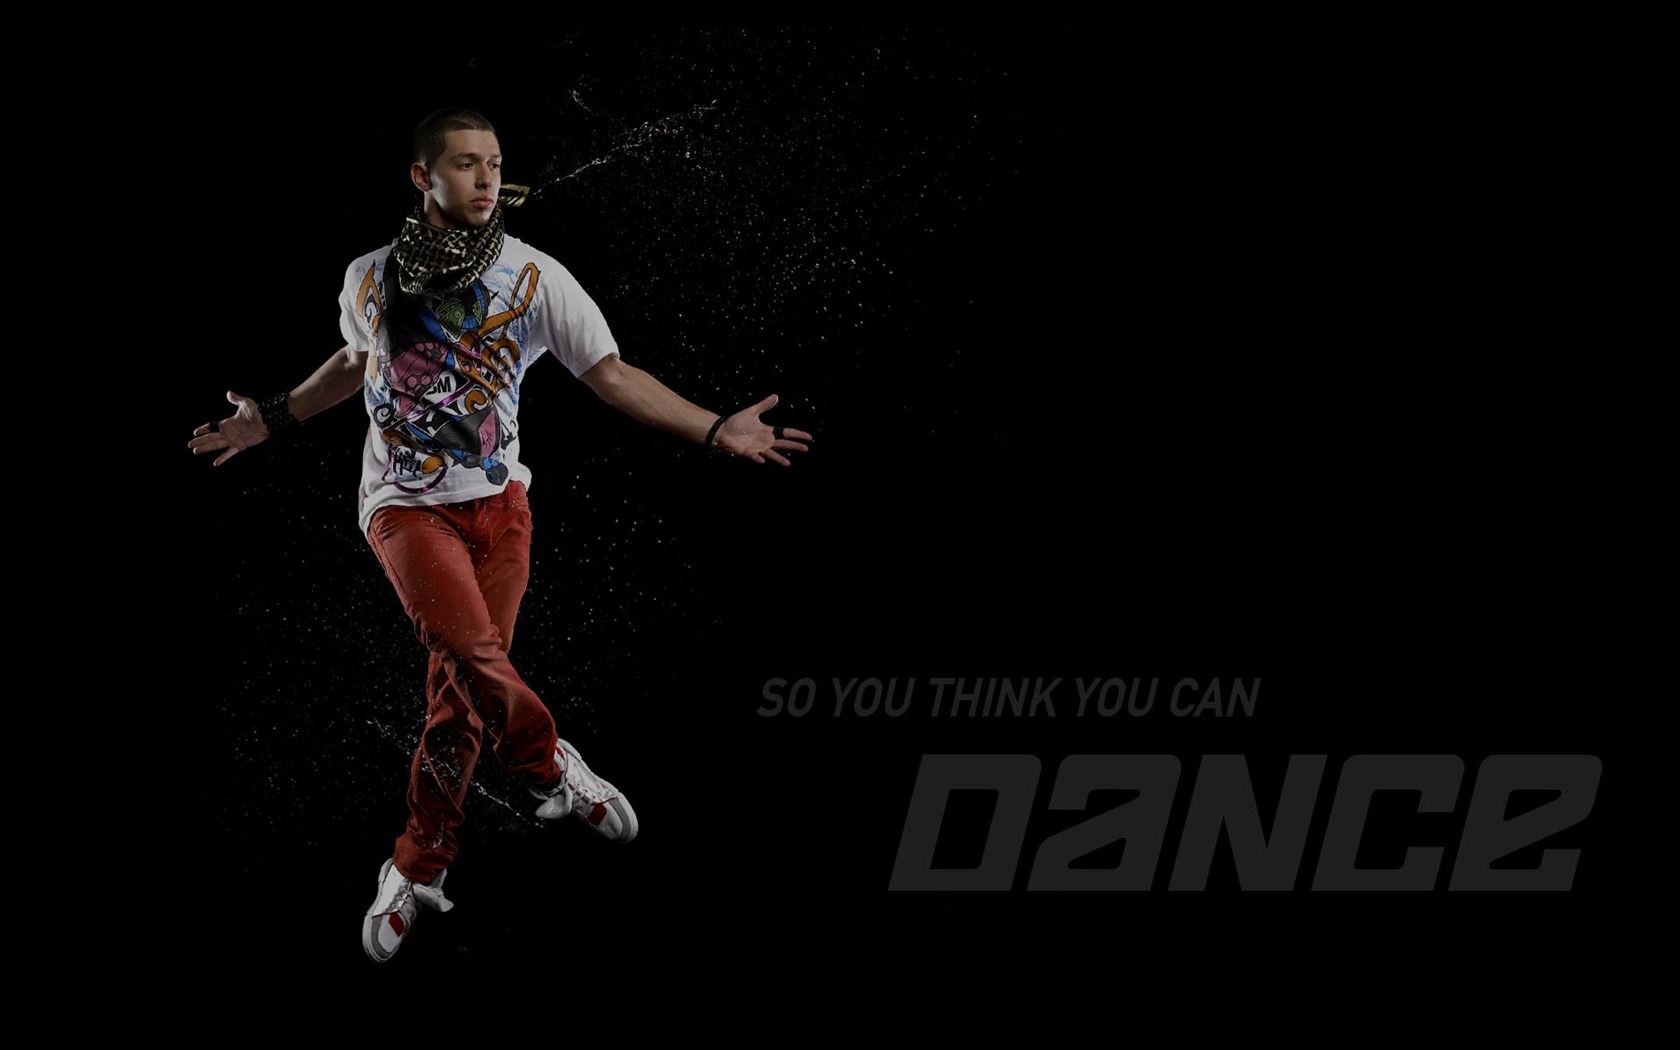 So You Think You Can Dance 舞林争霸 壁纸(一)16 - 1680x1050